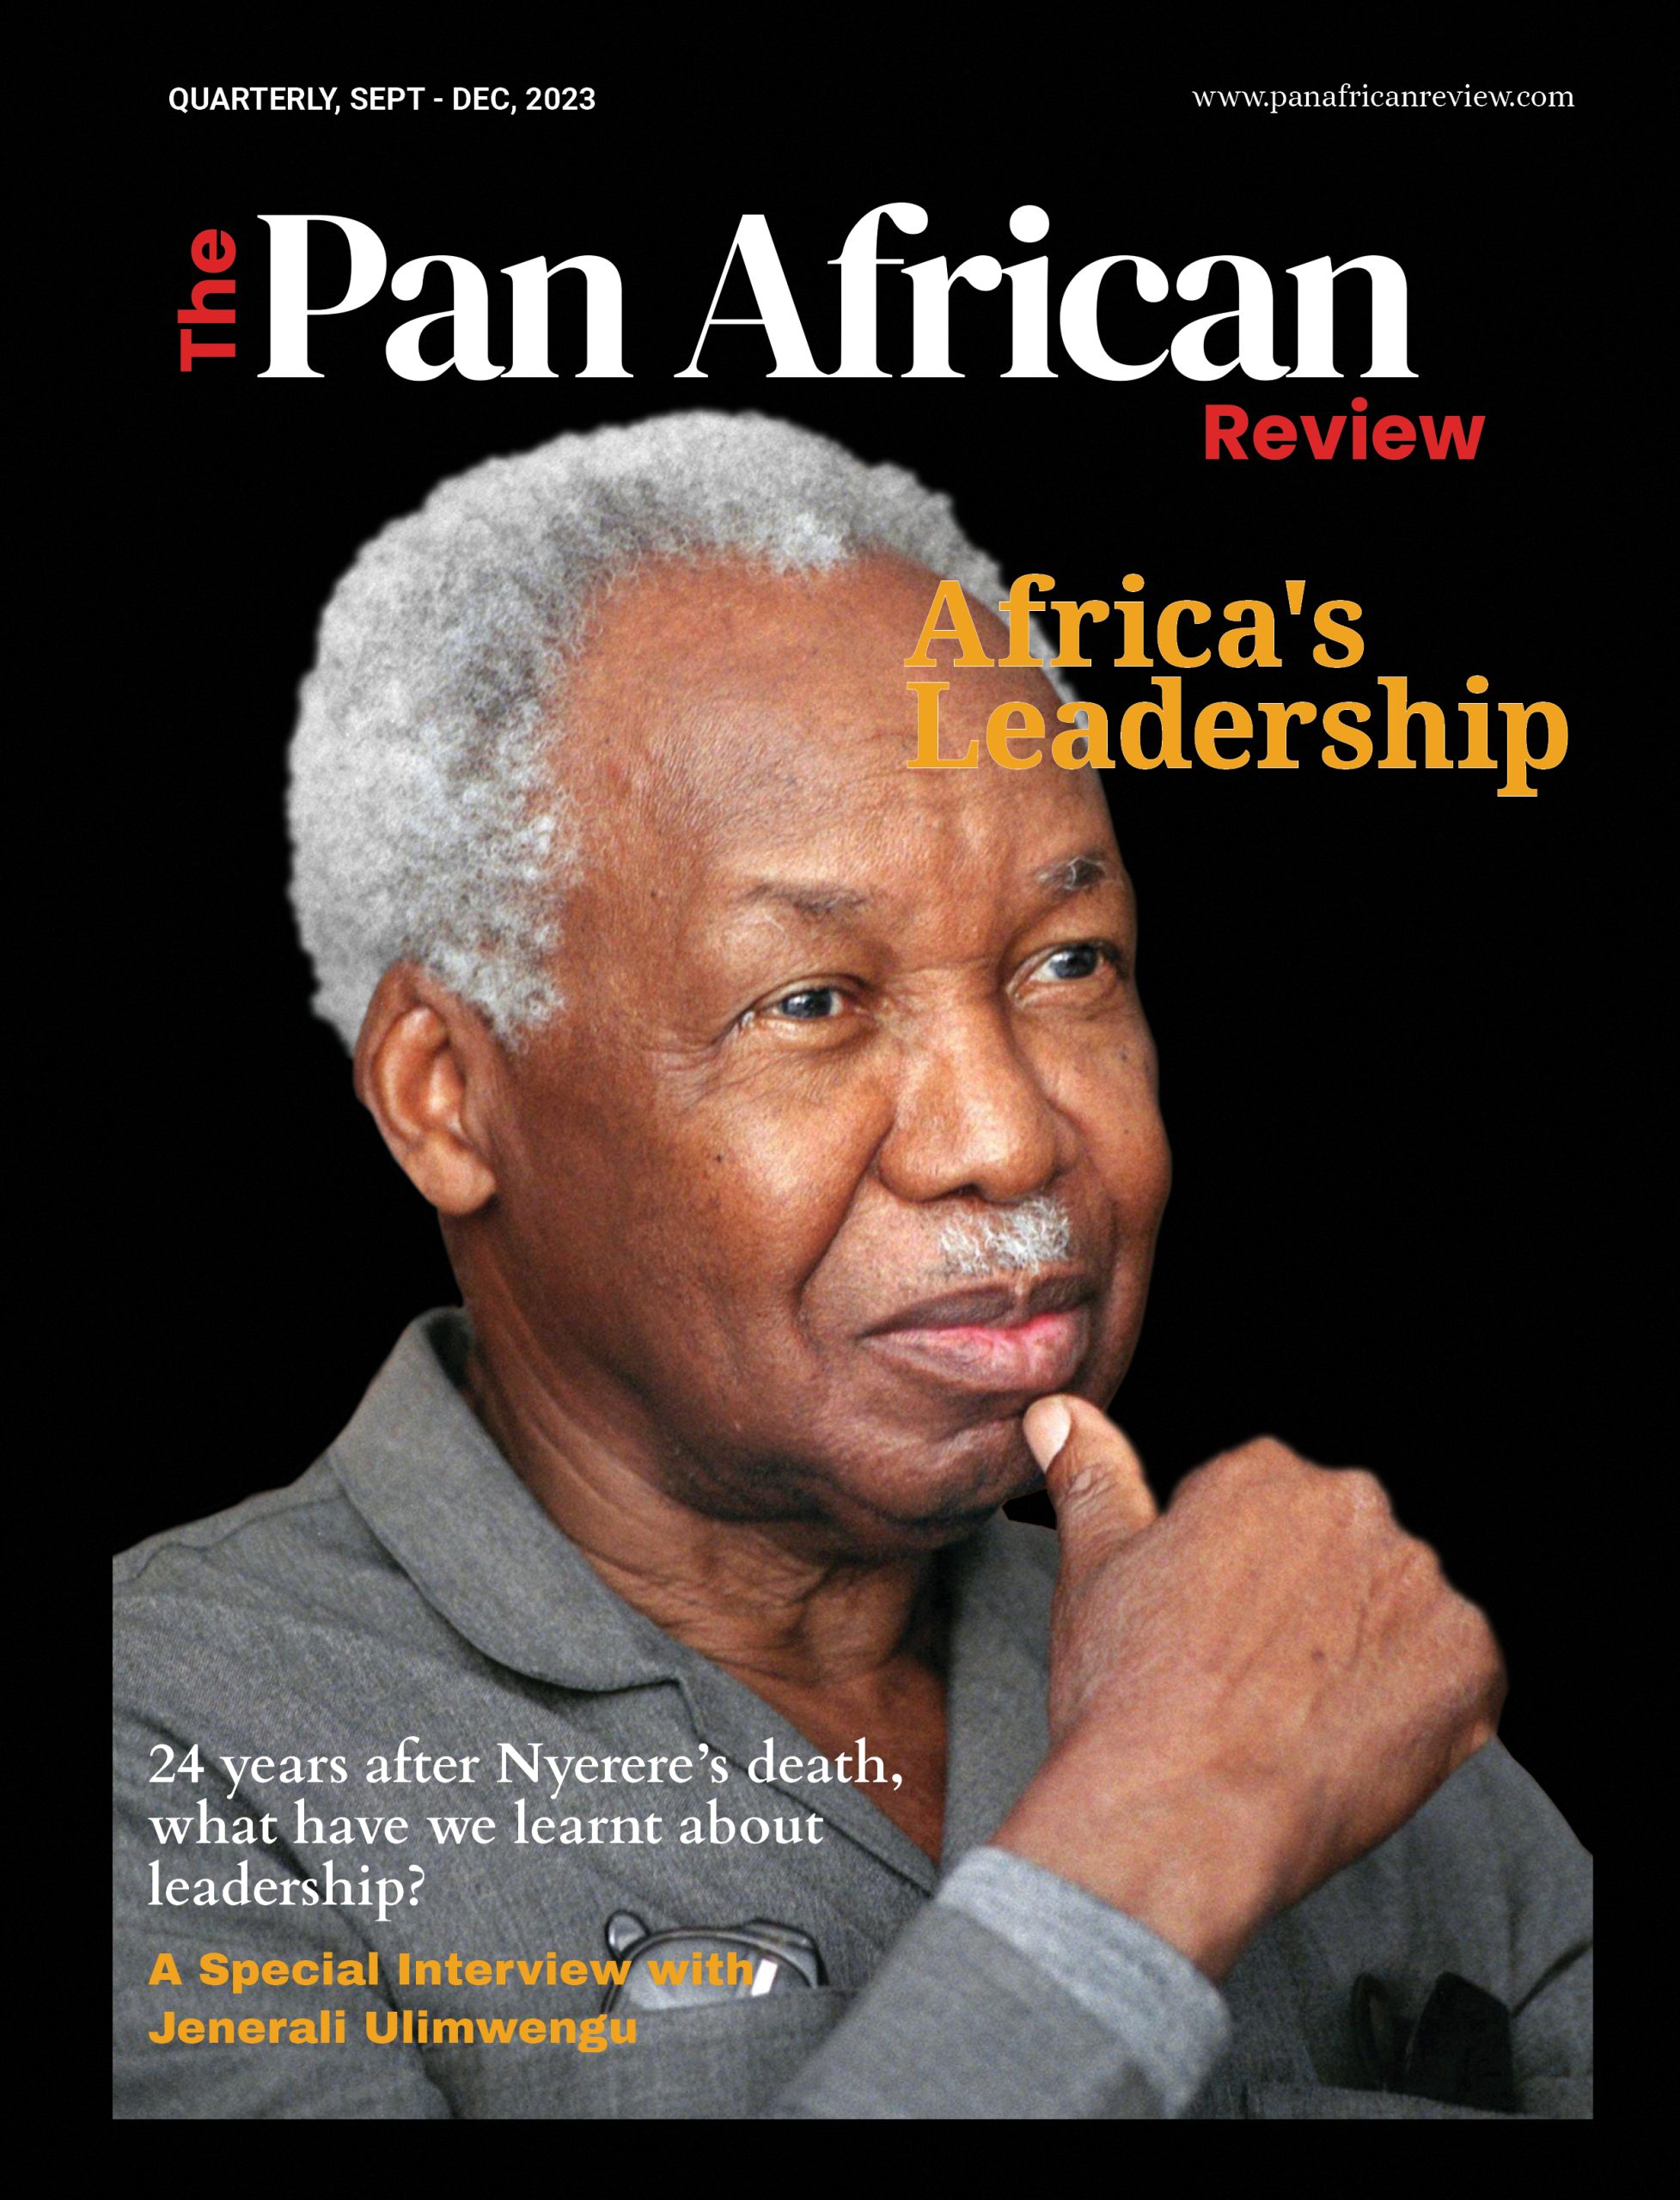 The Panafrican Review: Africa's leadership